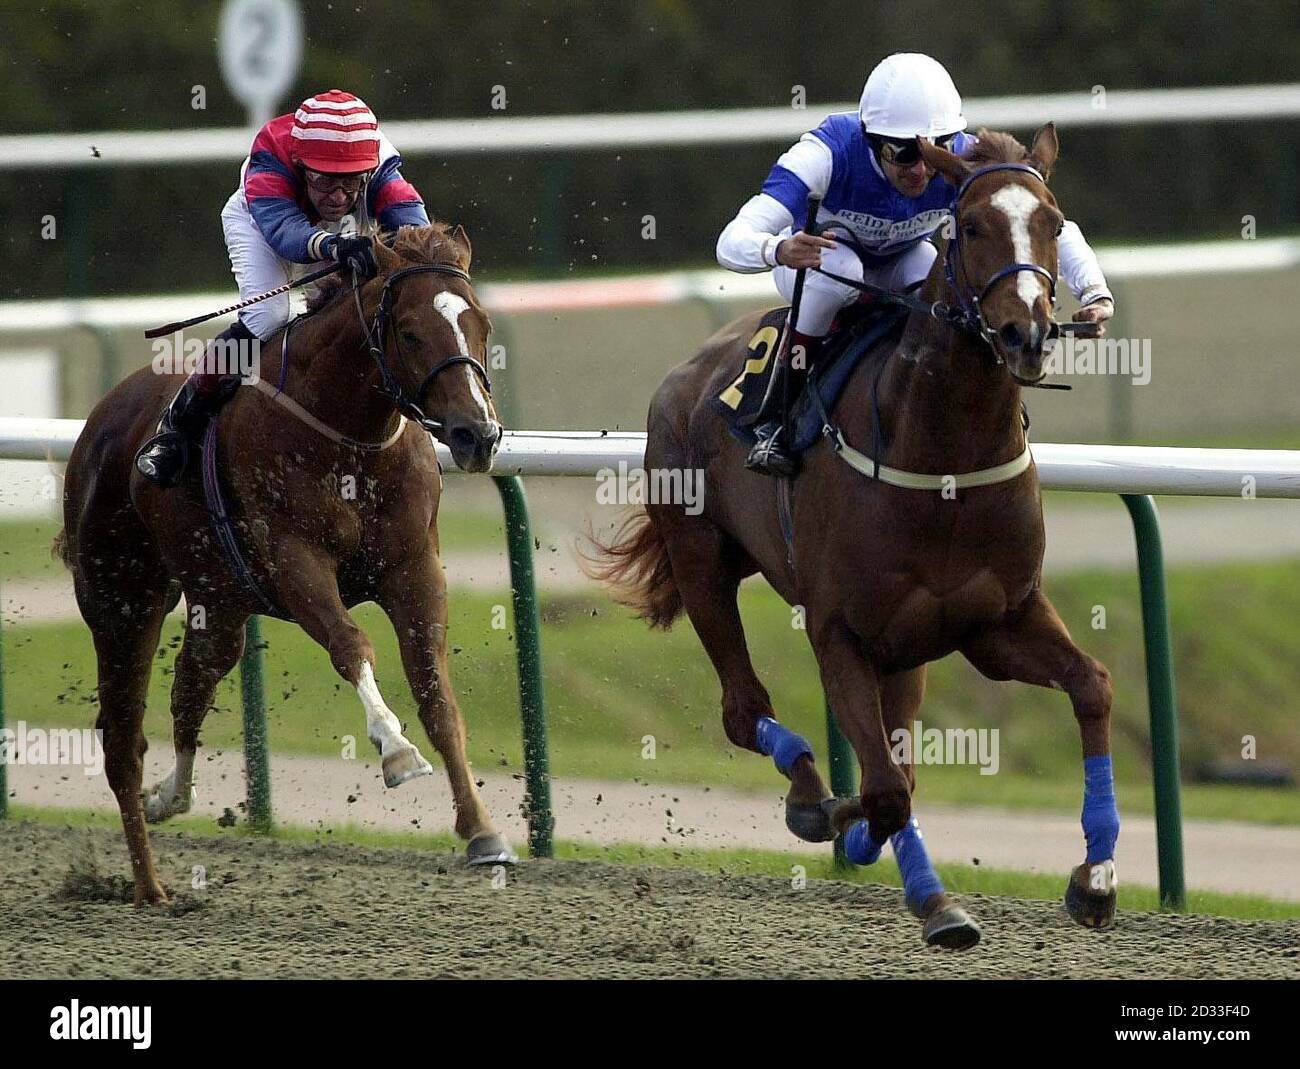 Eccentric ridden by jockey Darryll Holland (right) wins ahead of The Job ridden by jockey Willie Ryan in the Bet Direct Interactive Handicap at Lingfield. Stock Photo